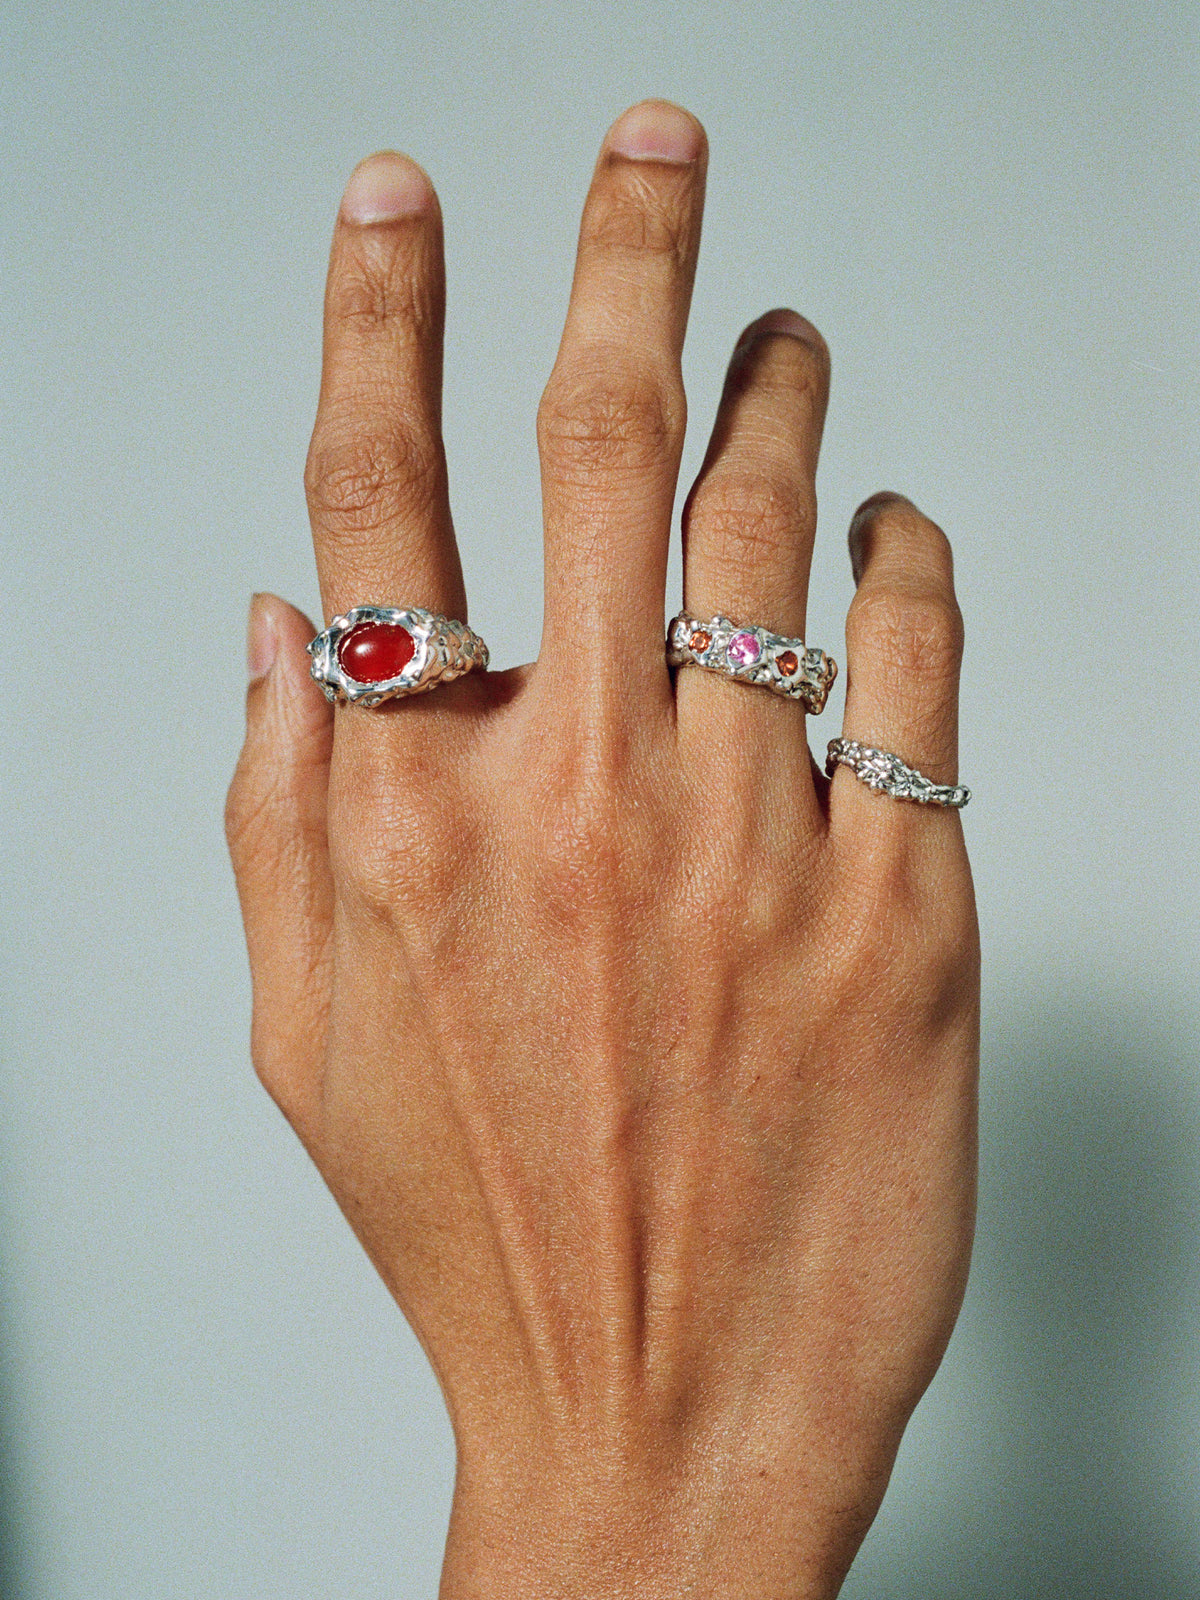 FARIS ROCA WAVE Ring in sterling silver worn on model. Styled with ROCA EYE Ring in silver with carnelian, and ROCA GEM Band in sterling silver with lab-created pink and orange sapphire.